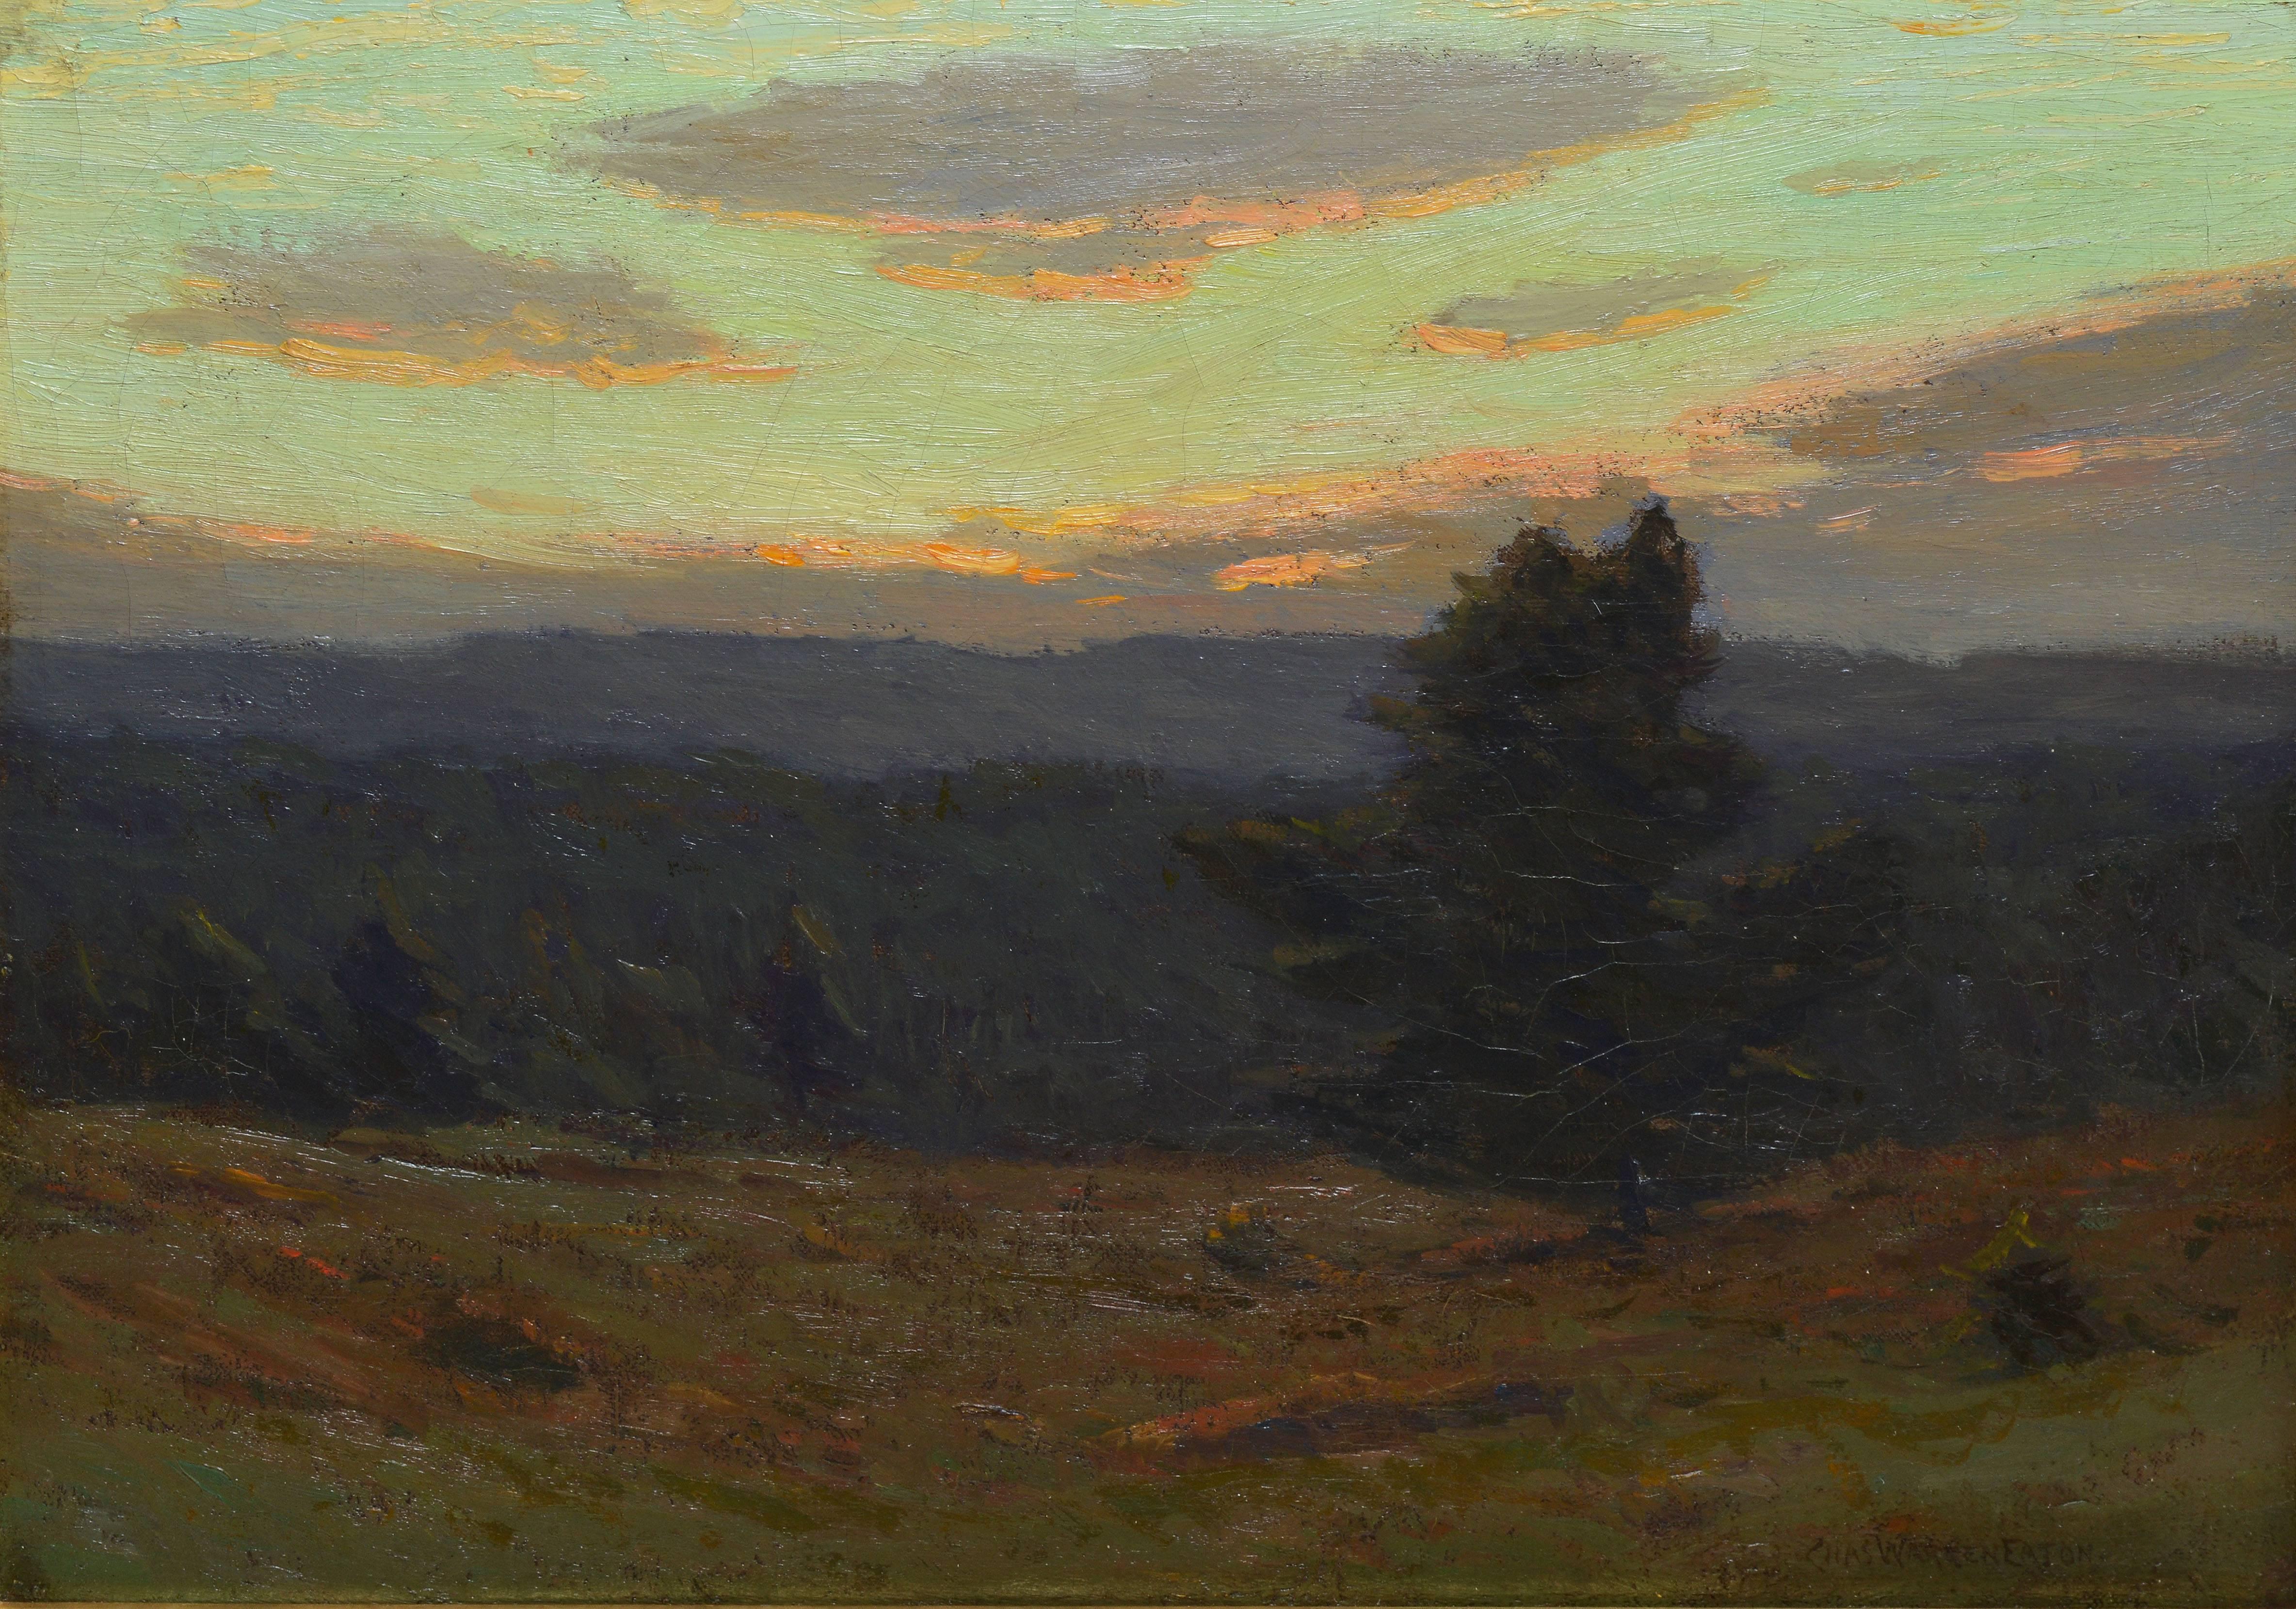 Impressionist sunset landscape by Charles Warren Eaton  (1857 - 1937).  Oil on canvas, circa 1900.  Signed lower right.  Displayed in a giltwood frame.  Image size, 16